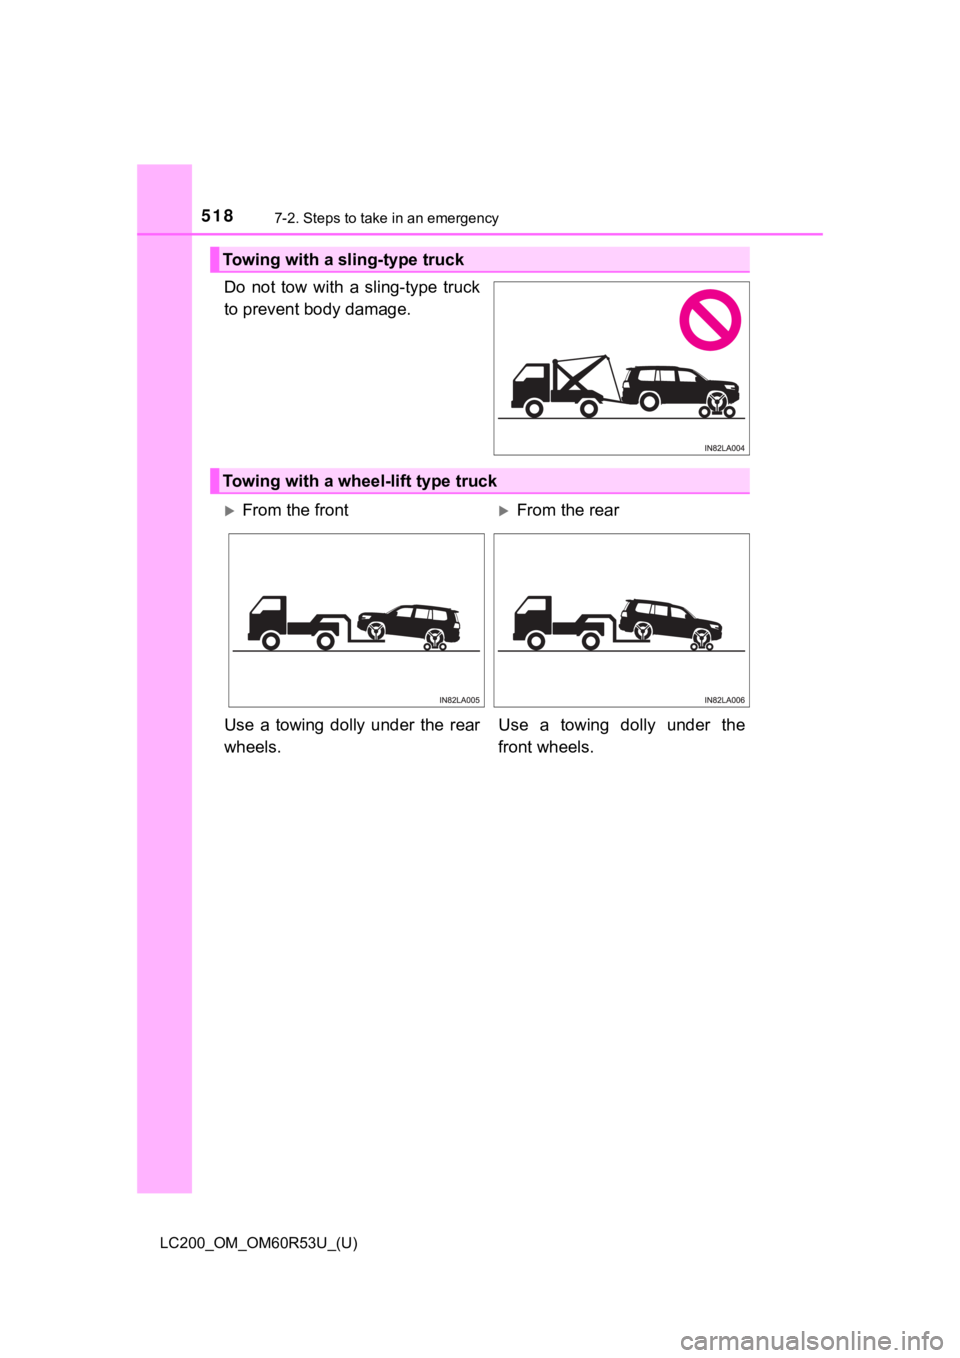 TOYOTA LAND CRUISER 2020  Owners Manual (in English) 5187-2. Steps to take in an emergency
LC200_OM_OM60R53U_(U)
Do  not  tow  with  a  sling-type  truck
to prevent body damage.
Towing with a sling-type truck
Towing with a wheel-lift type truck
From 